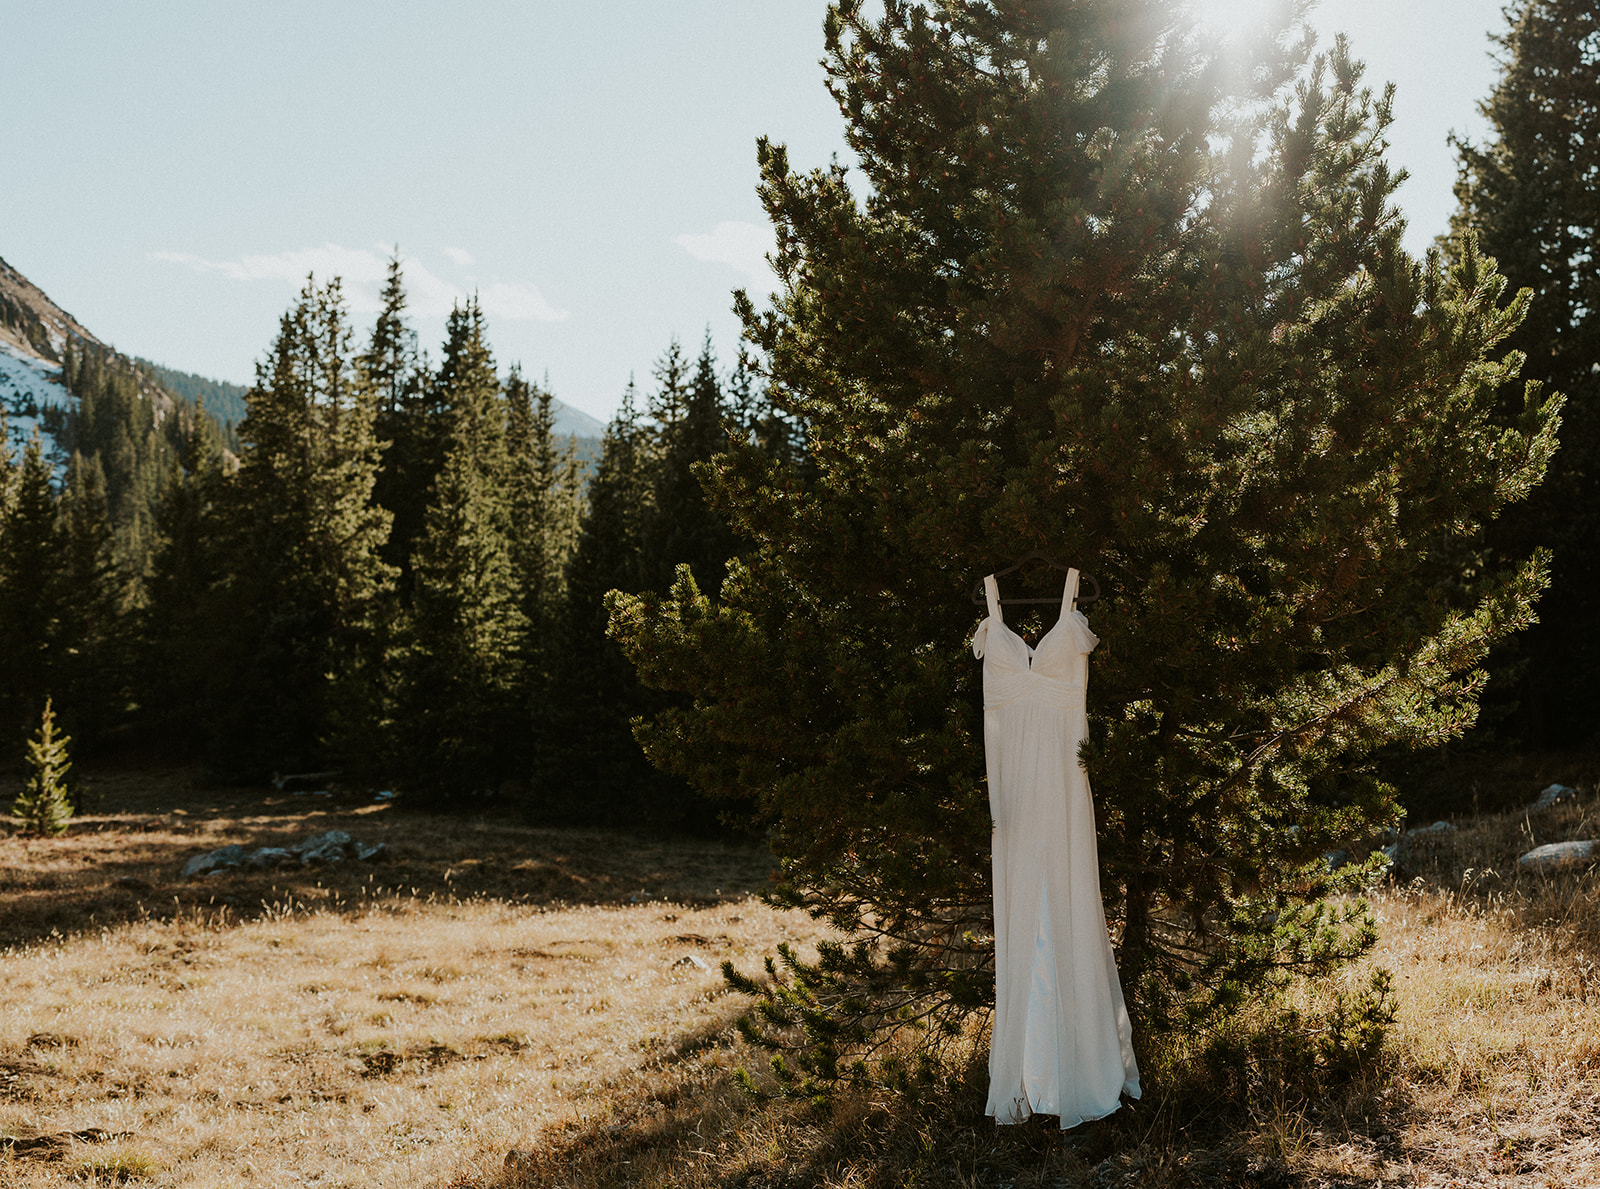 A wedding dress hanging in a fur tree during a Colorado Helicopter Wedding